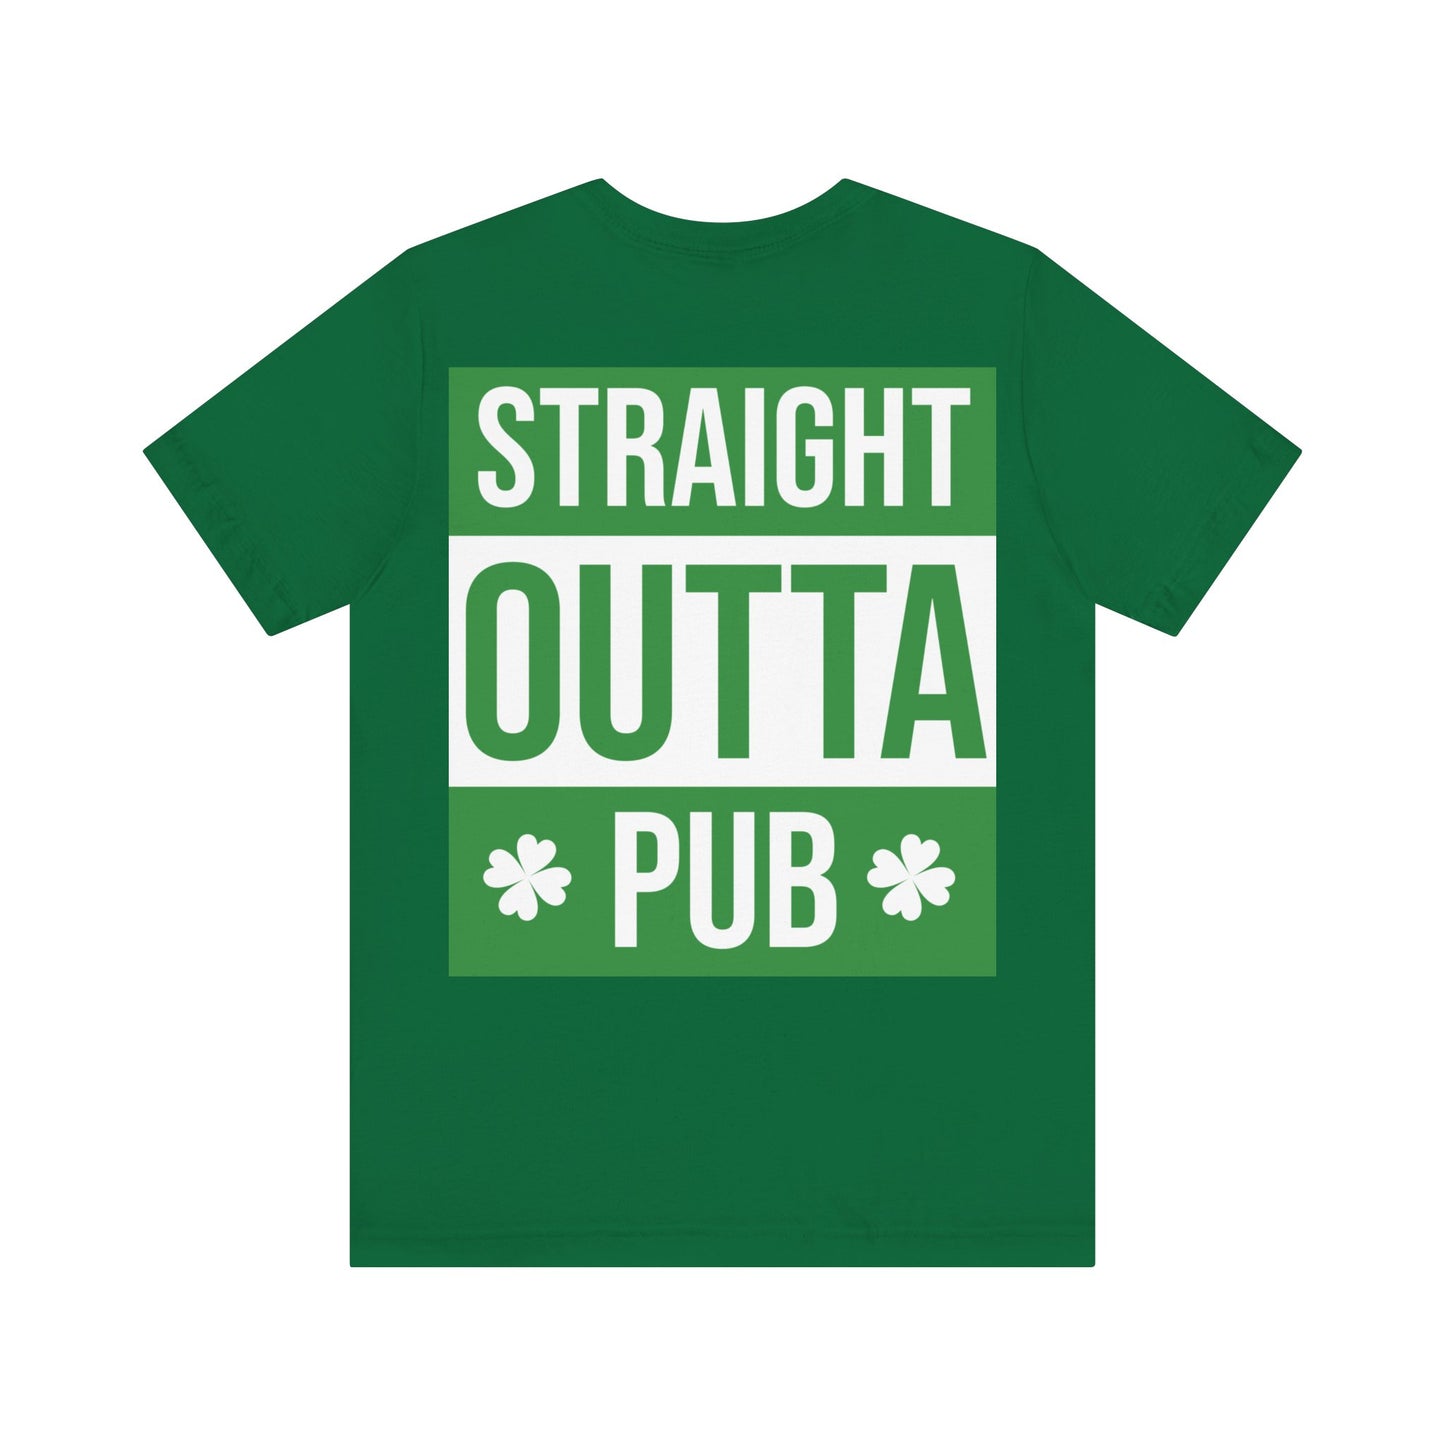 St. Patrick's Day "Straight Outta Pub"  -  Short Sleeve Tee